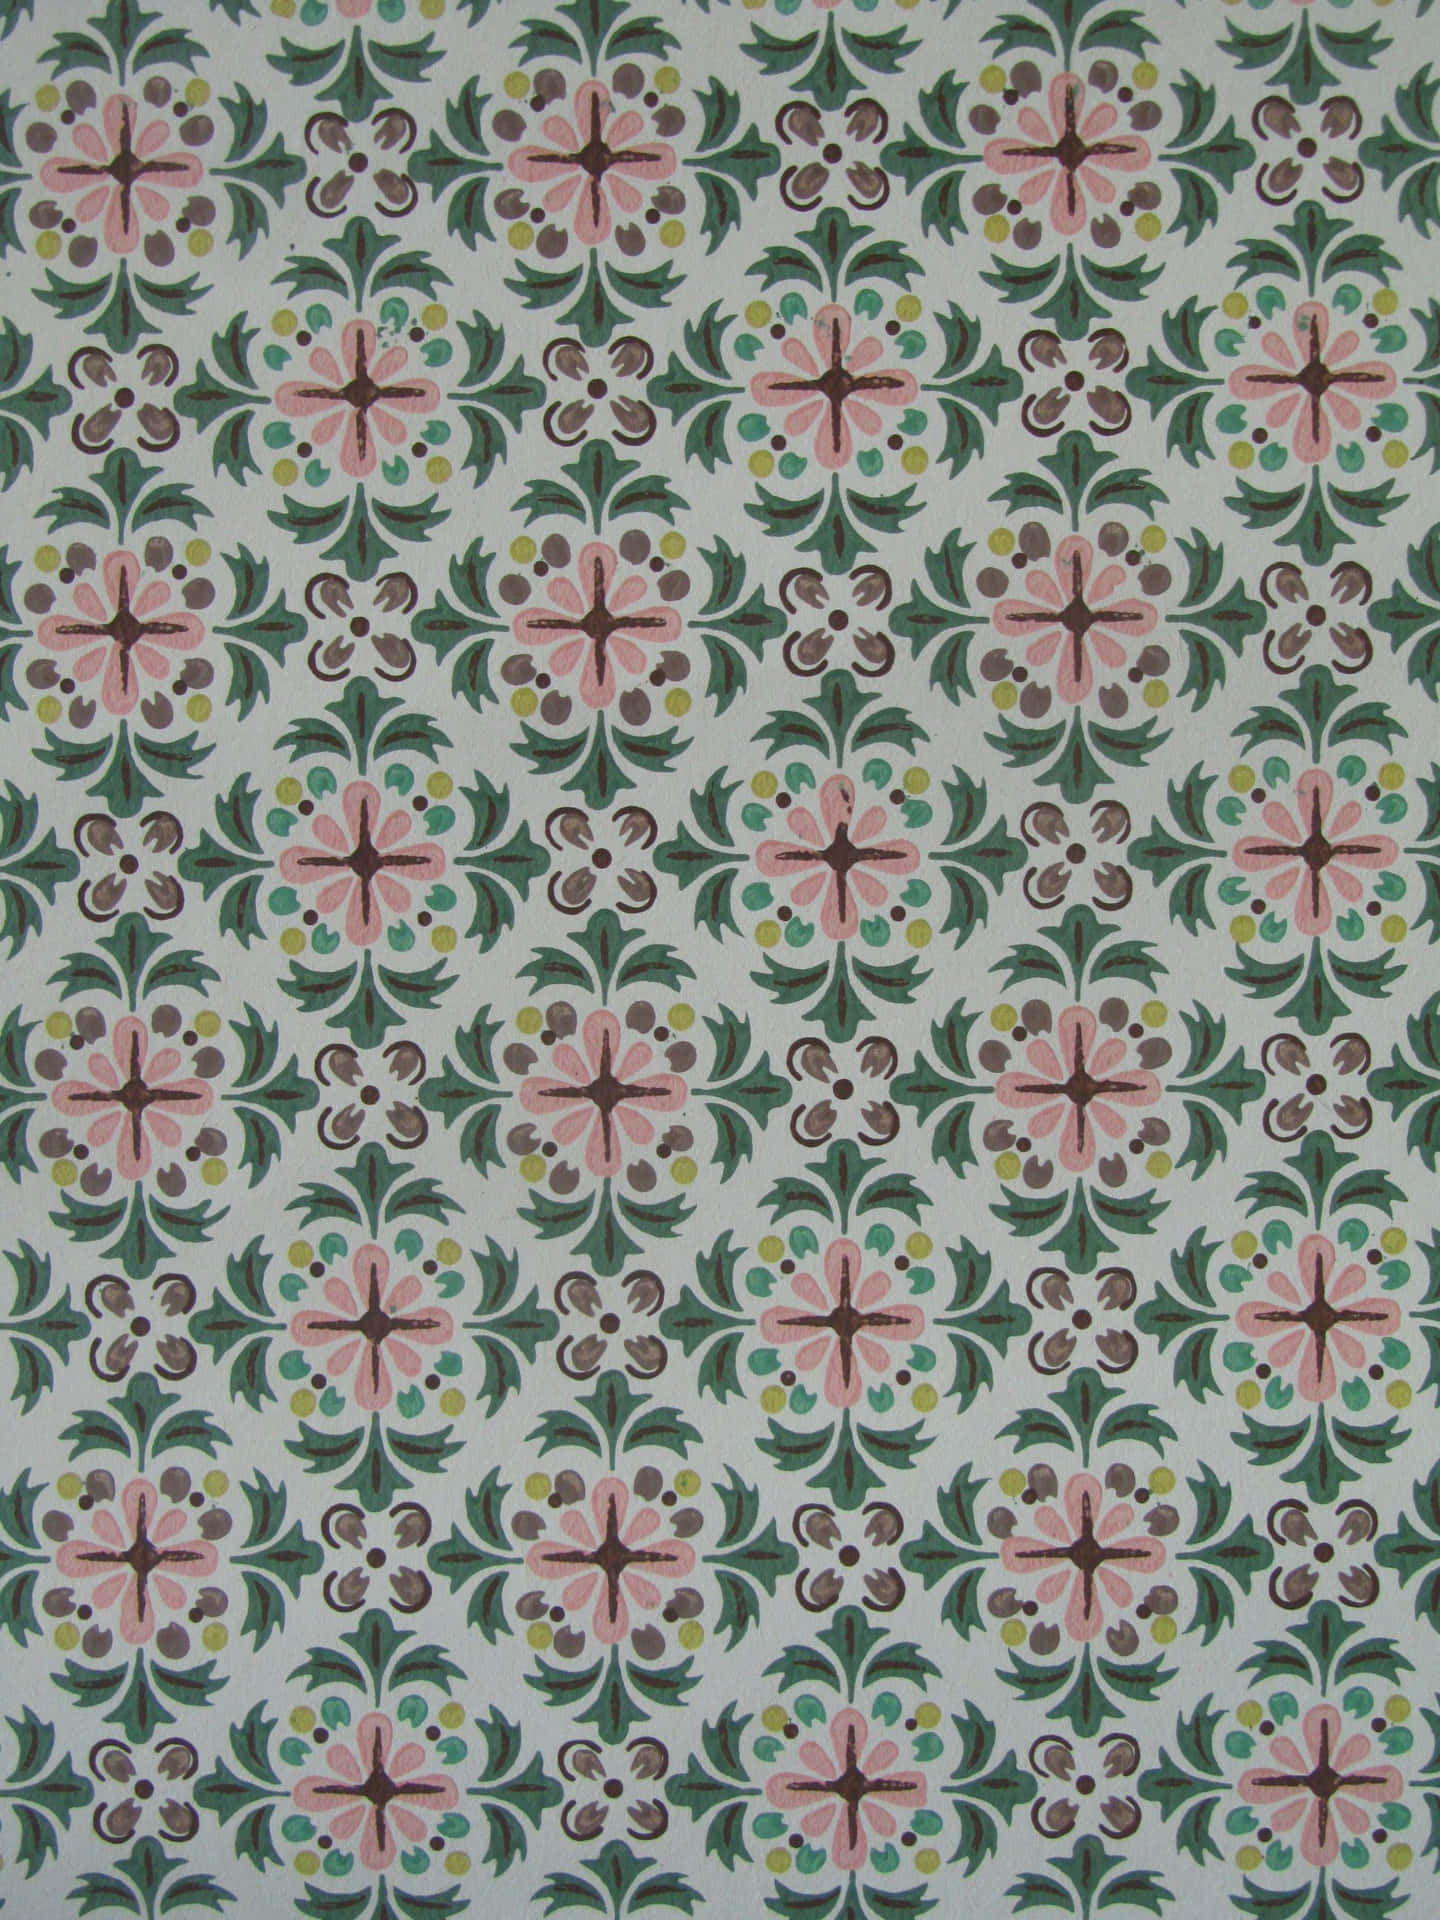 A Green And Pink Tile With Floral Designs Background